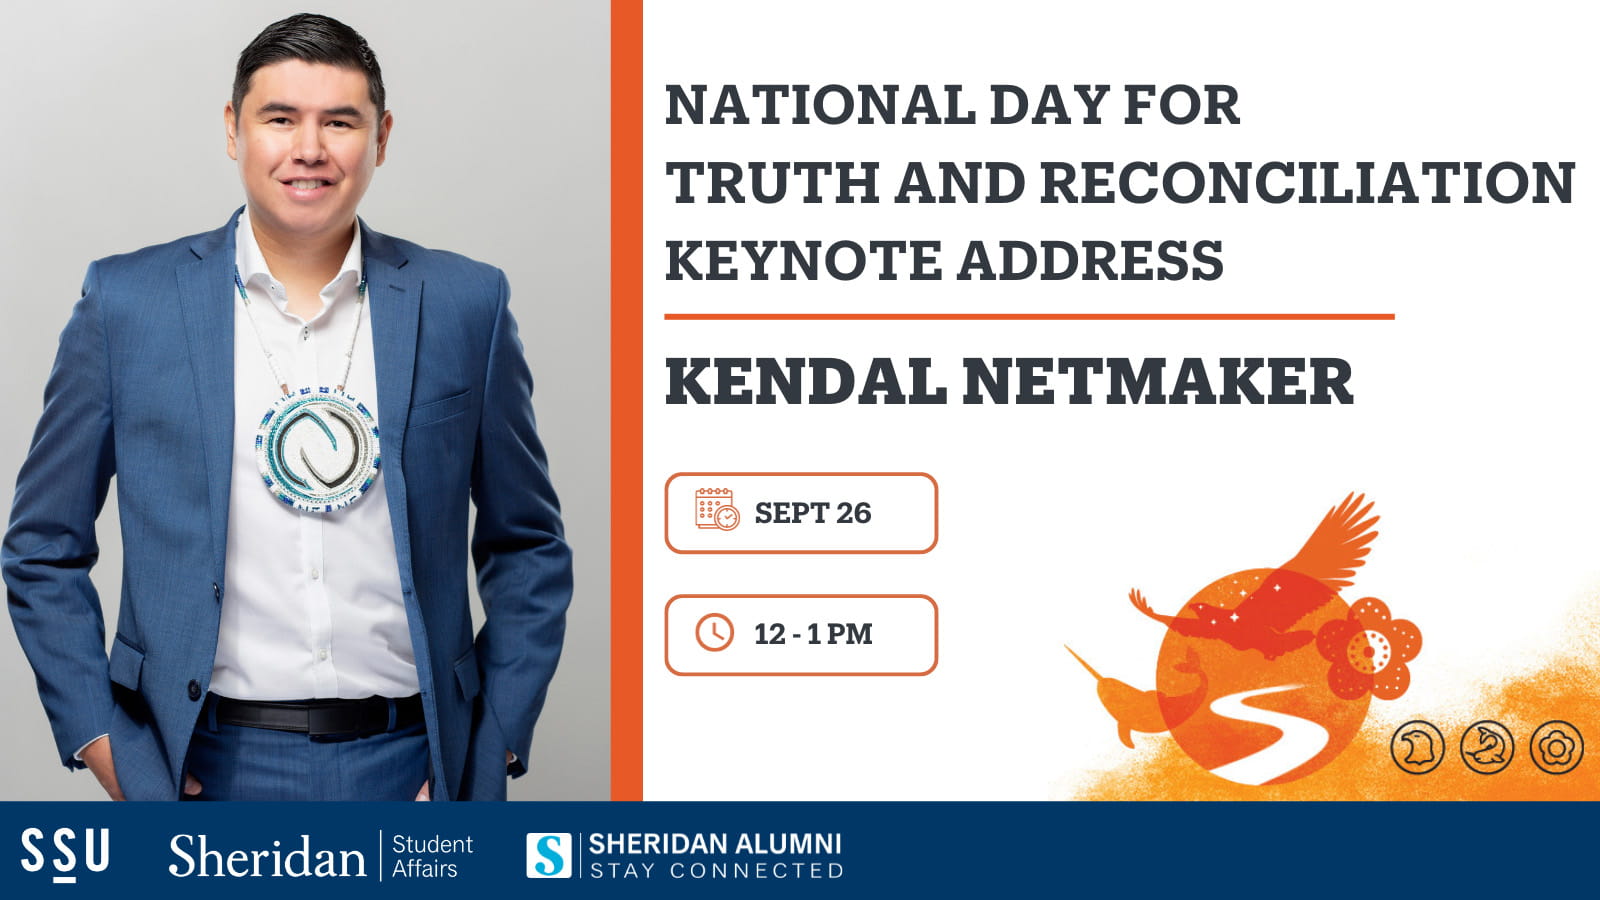 National Day for Truth and Reconciliation Keynote Address | Kendal Netmaker | Sept 26 | 12-1 p.m. | SSU | Sheridan Student Affairs | Sheridan Alumni | Stay Connected